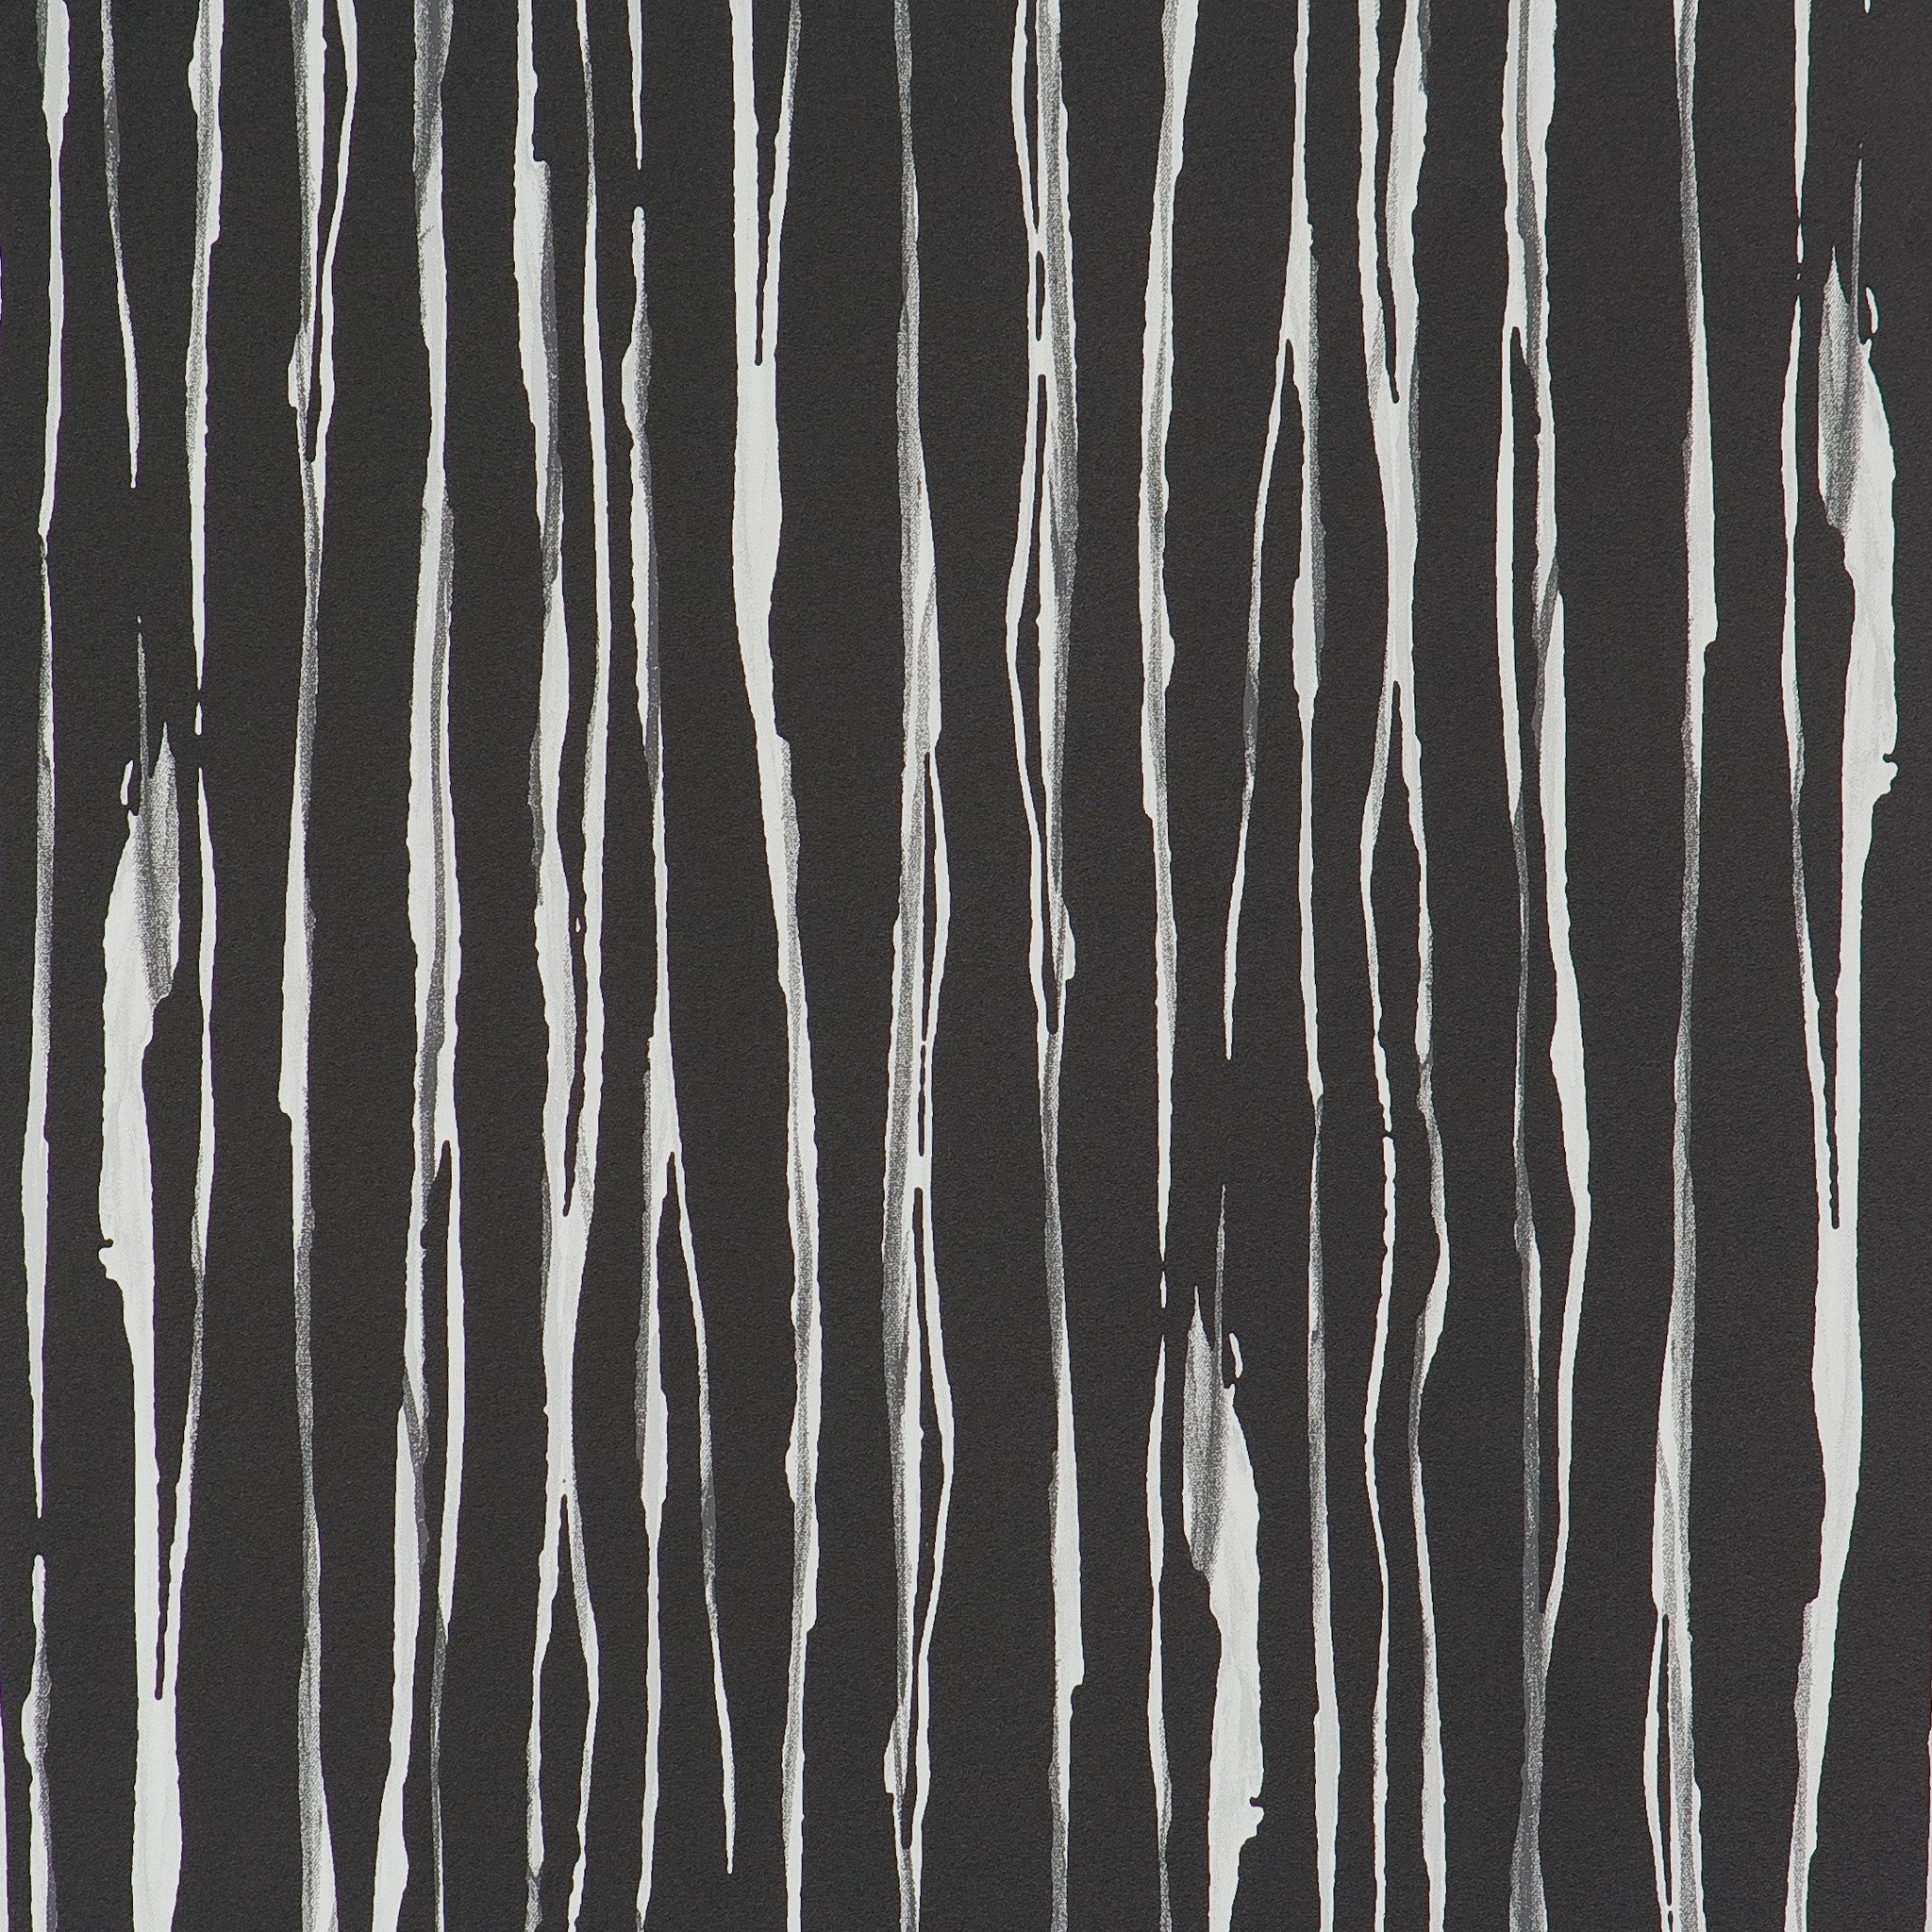 2048x2048 Abstract Stripes Wallpaper in Black and Grey design by BD Wall